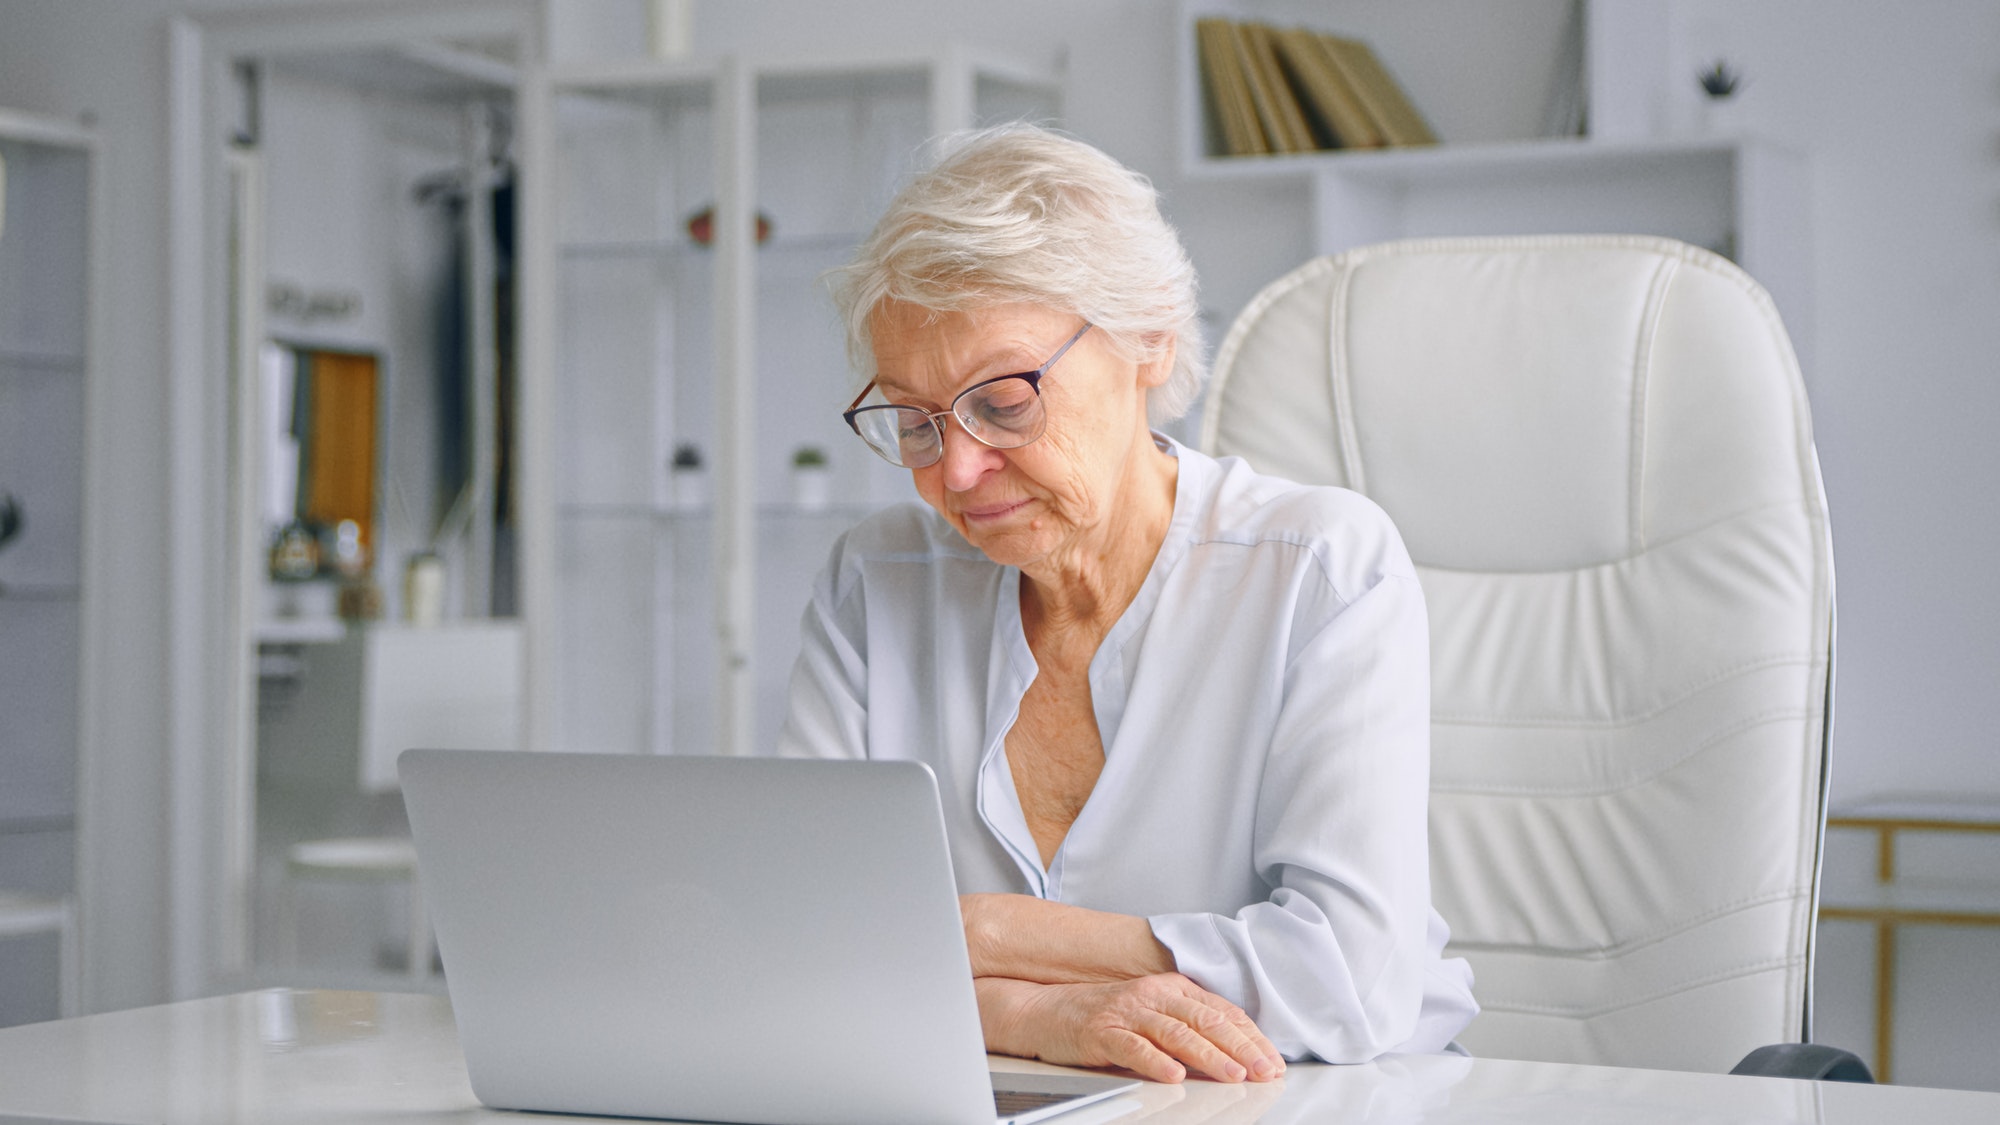 Angry old businesswoman looks around sitting on white chair at table